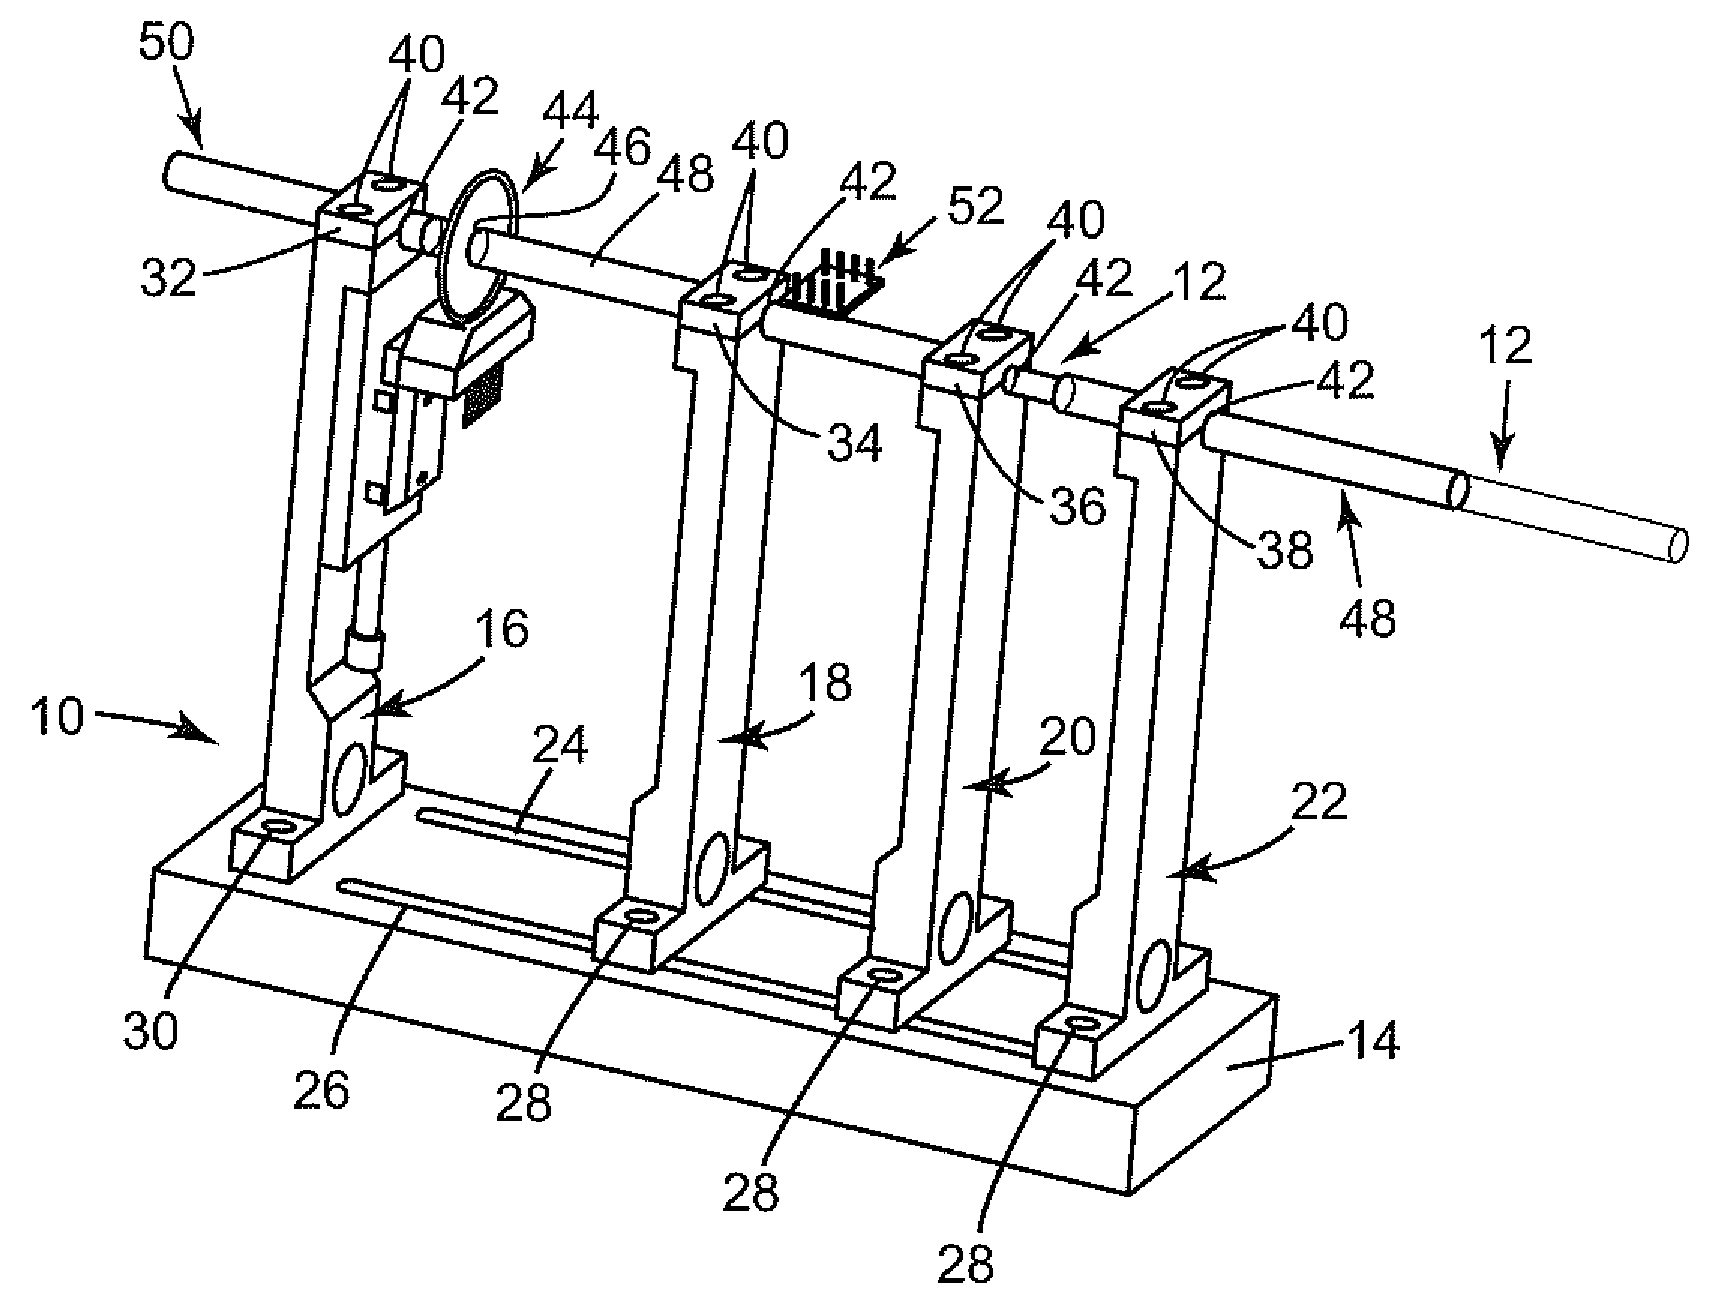 Mapping Movement of a Movable Transducer